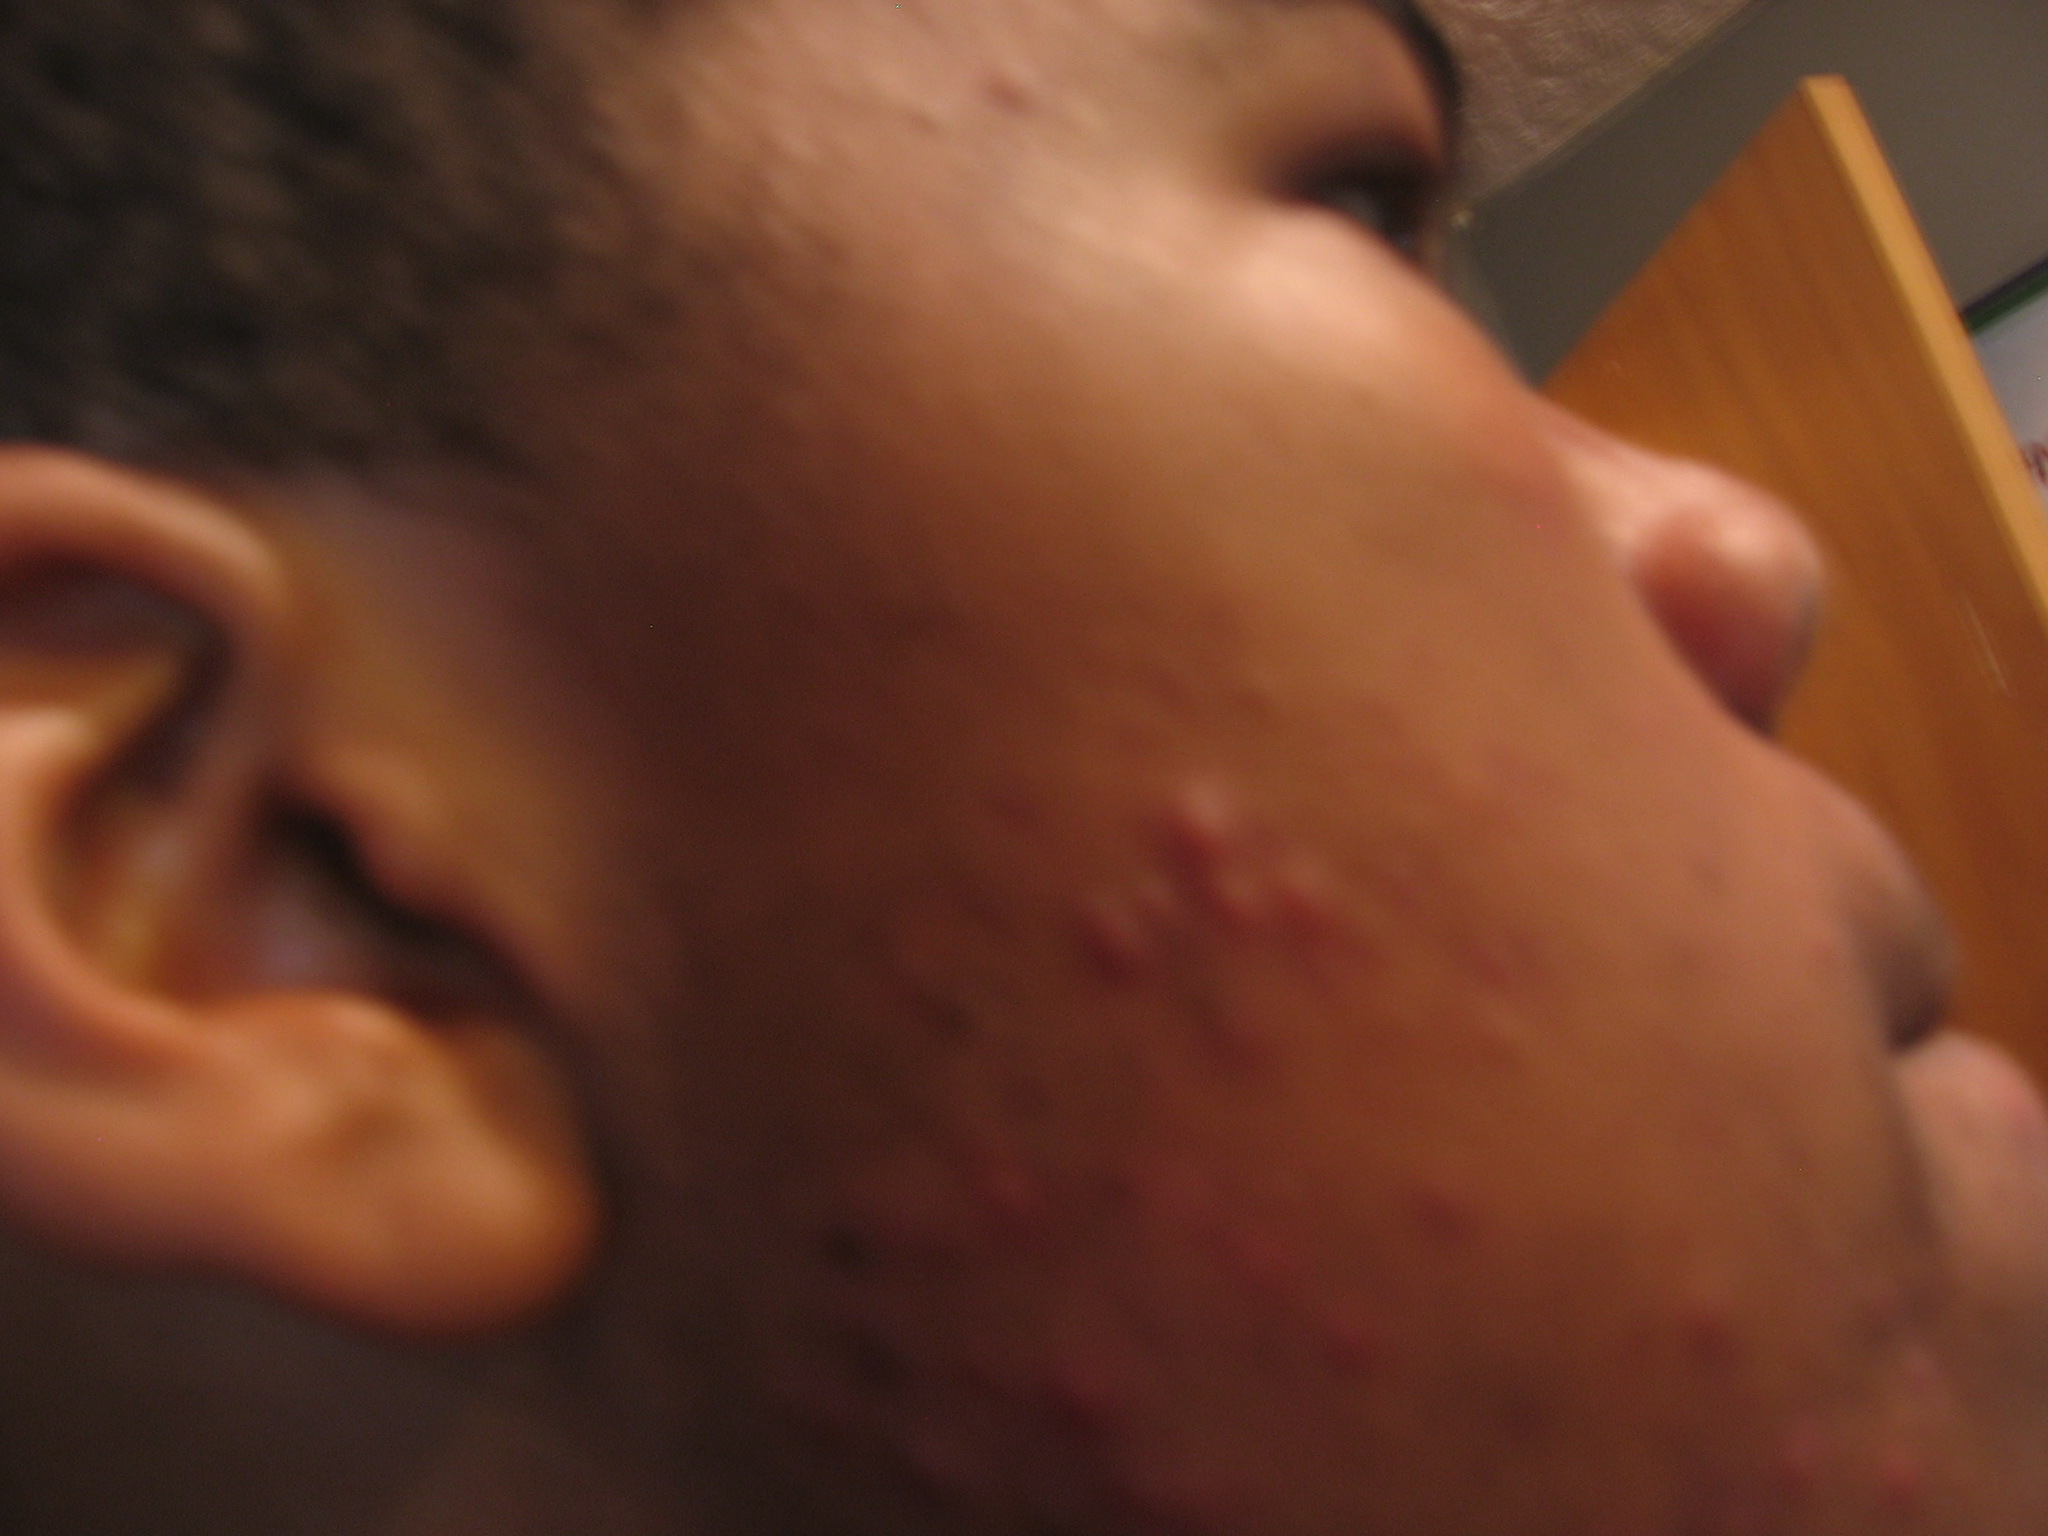 Painful Pauples Small White Bumps General Acne Discussion